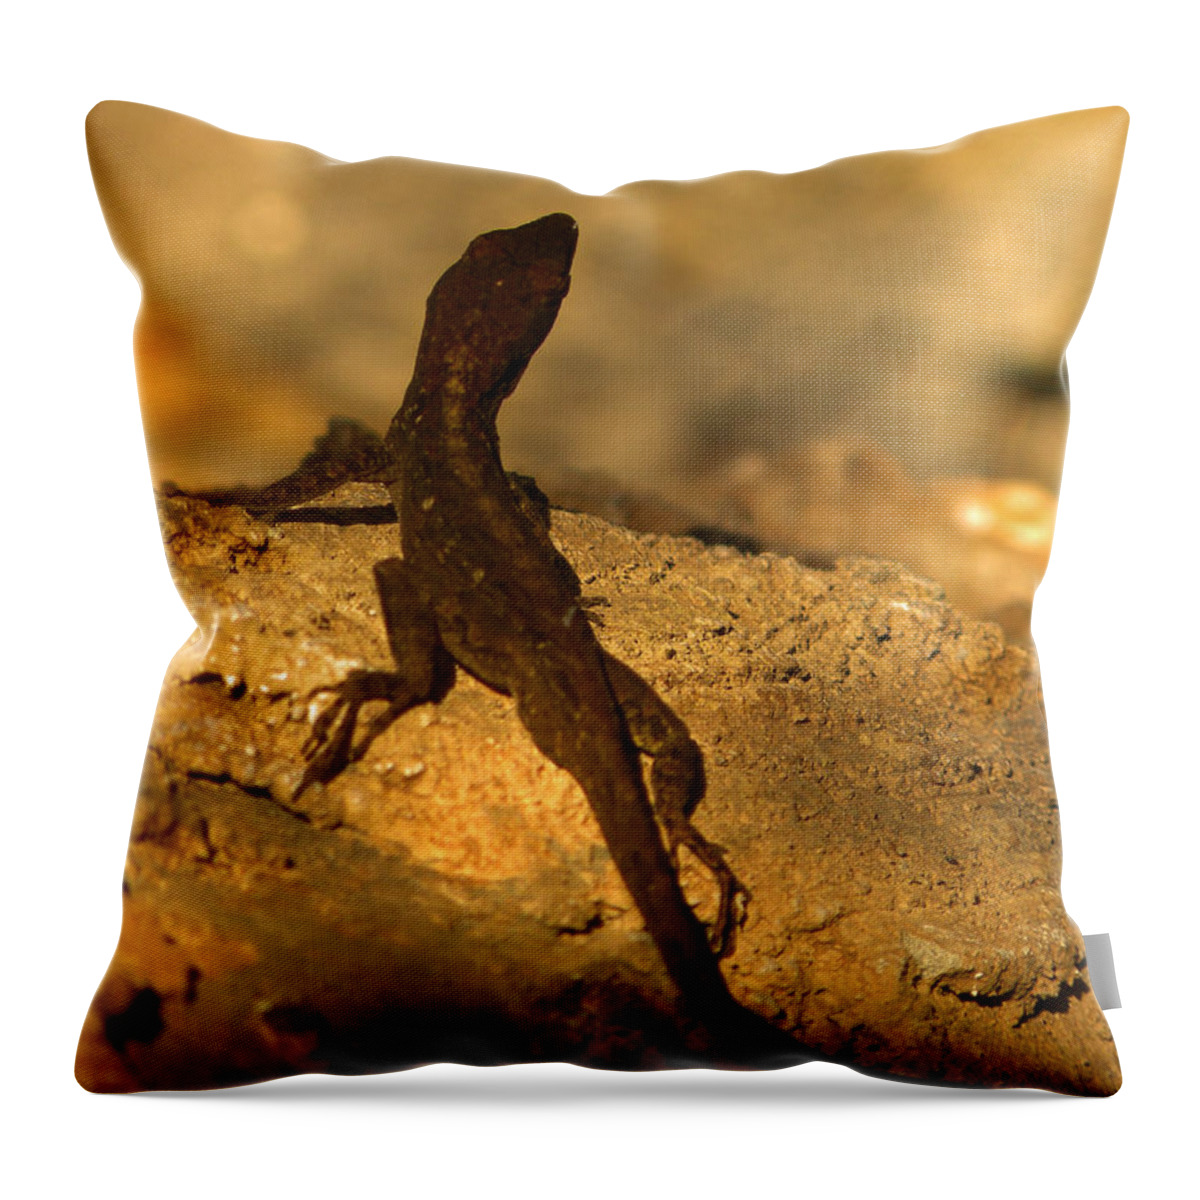 Lizard Throw Pillow featuring the photograph Leapin' Lizards by Trish Tritz